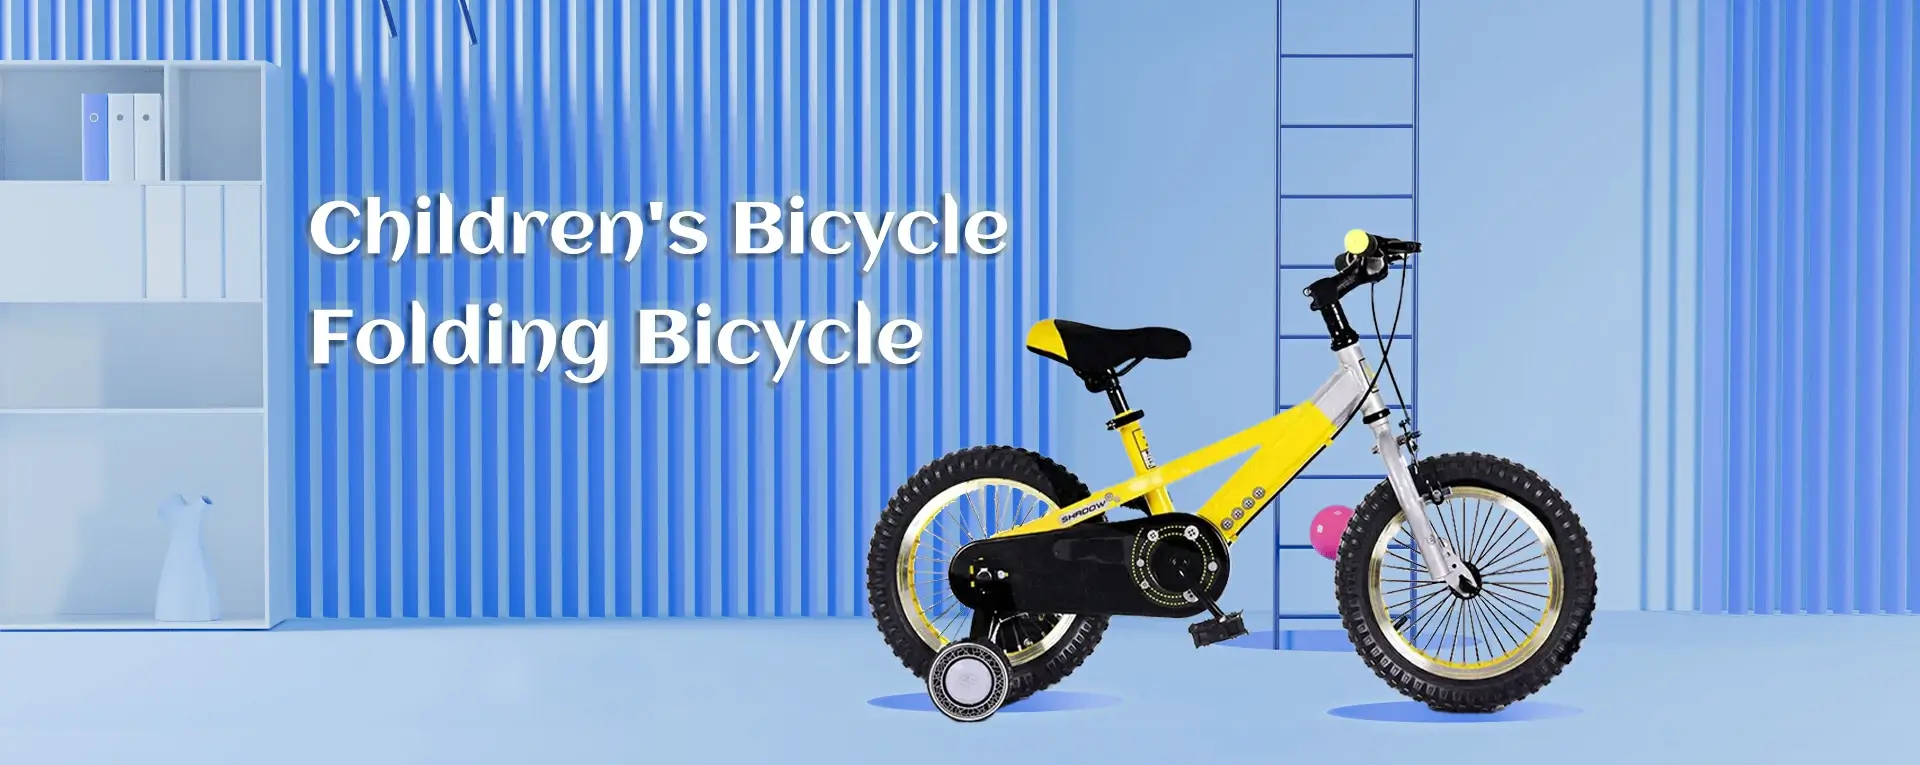 children's Bicycle Folding Bicycle